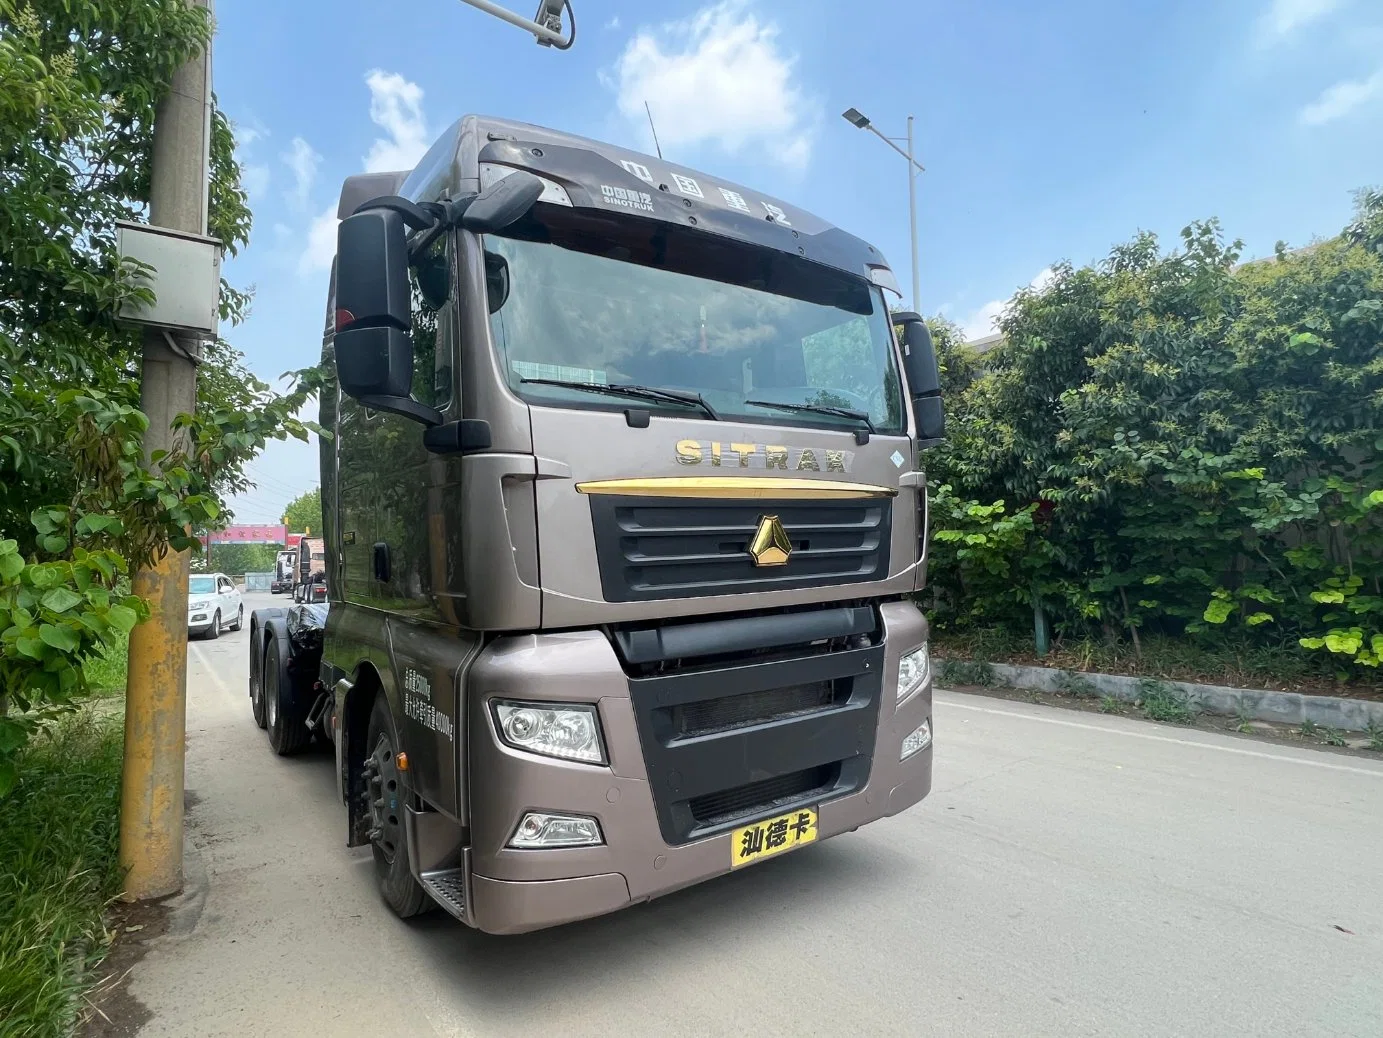 Sinotruck CNG Used 430HP 540 HP Sinotruk HOWO Sitrak T7h Camc CNG Tractor Truck Head 6X4 Used CNG Euro 5 Tractor Trucks